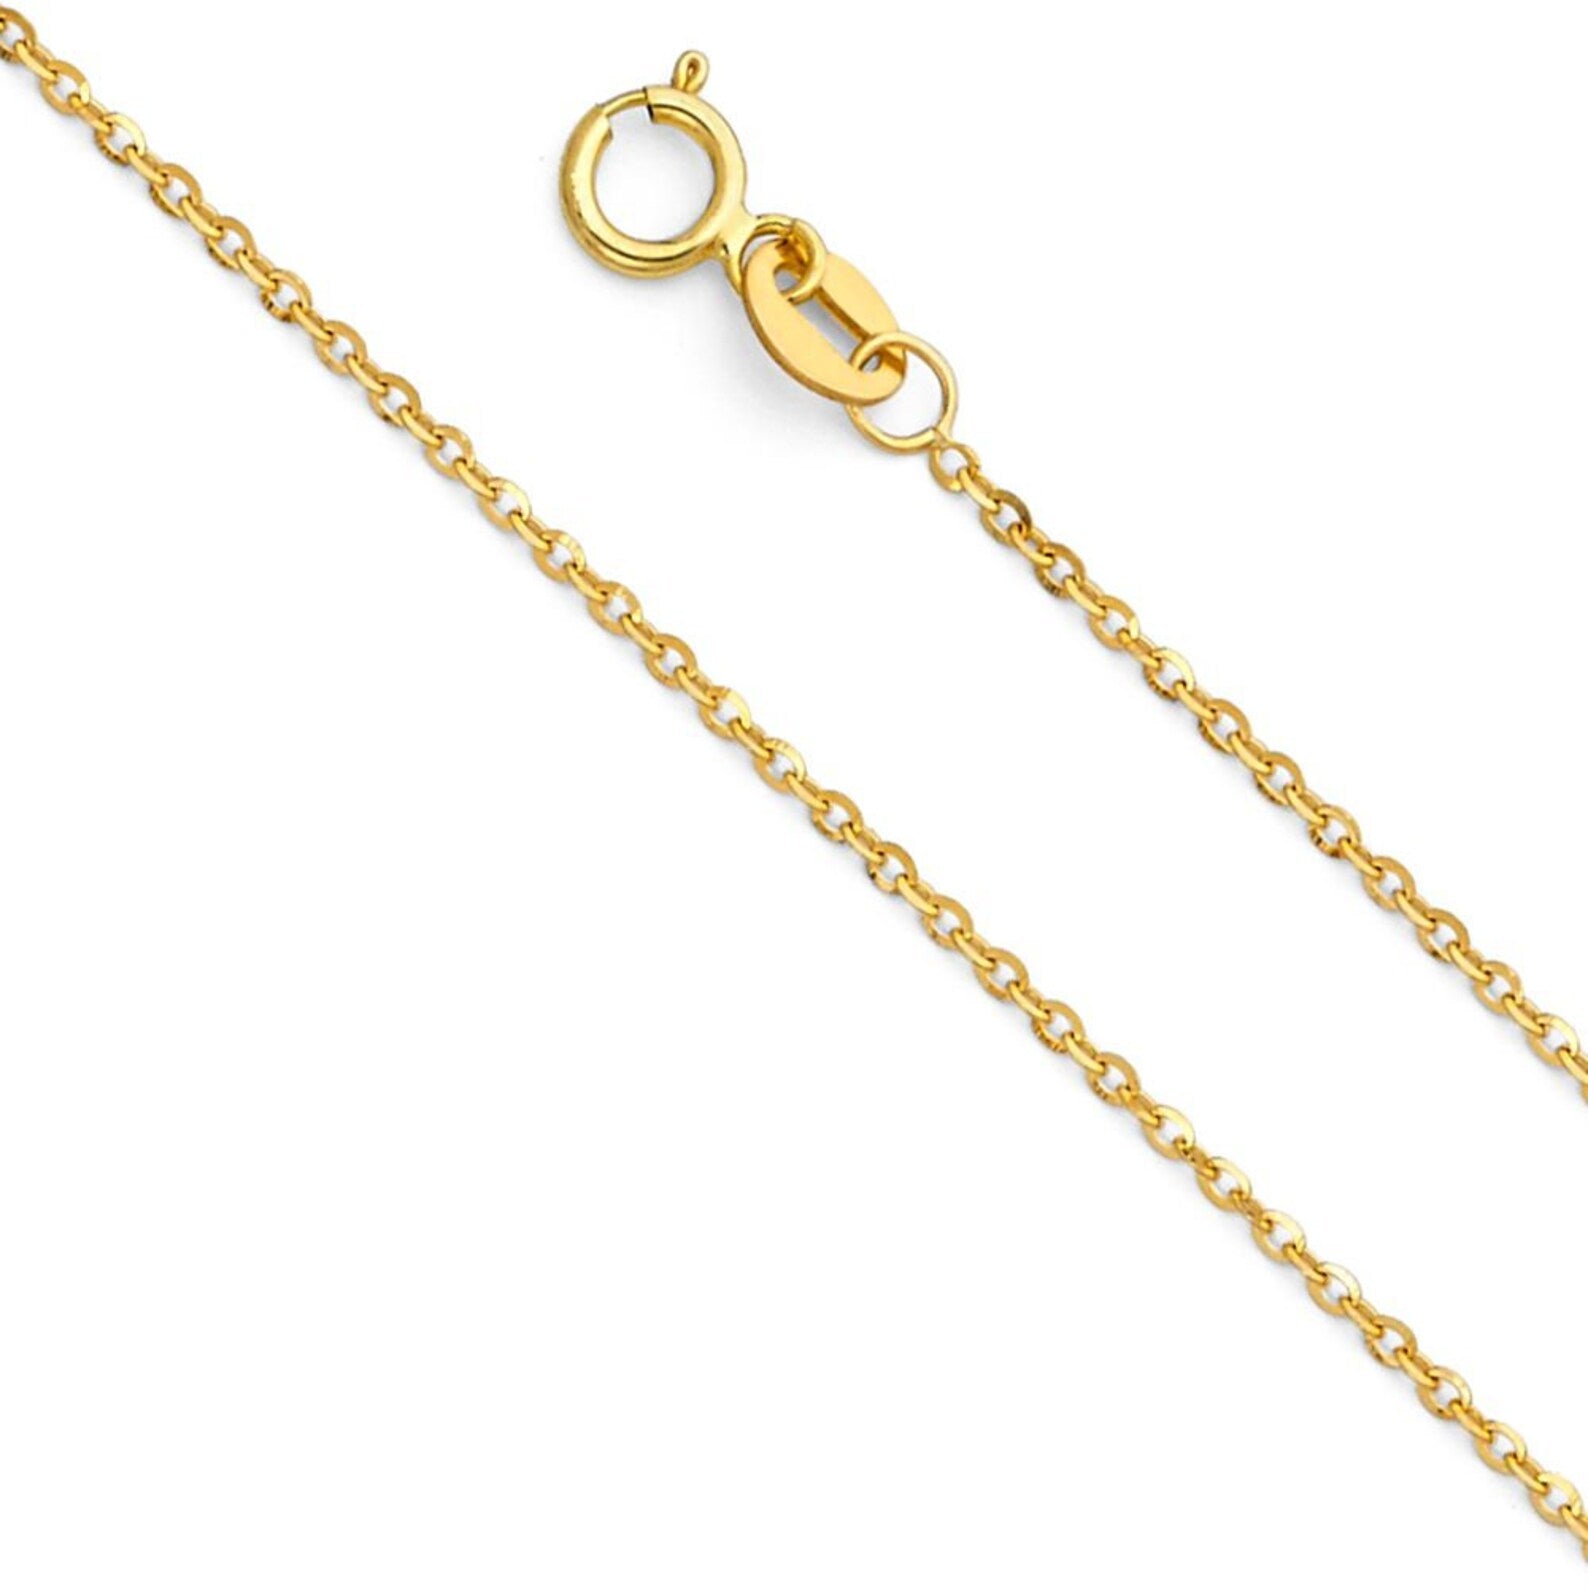 1.2mm 14k Solid Gold Cable Chain Diamond Cut Model-0232 - Charlie & Co. Jewelry